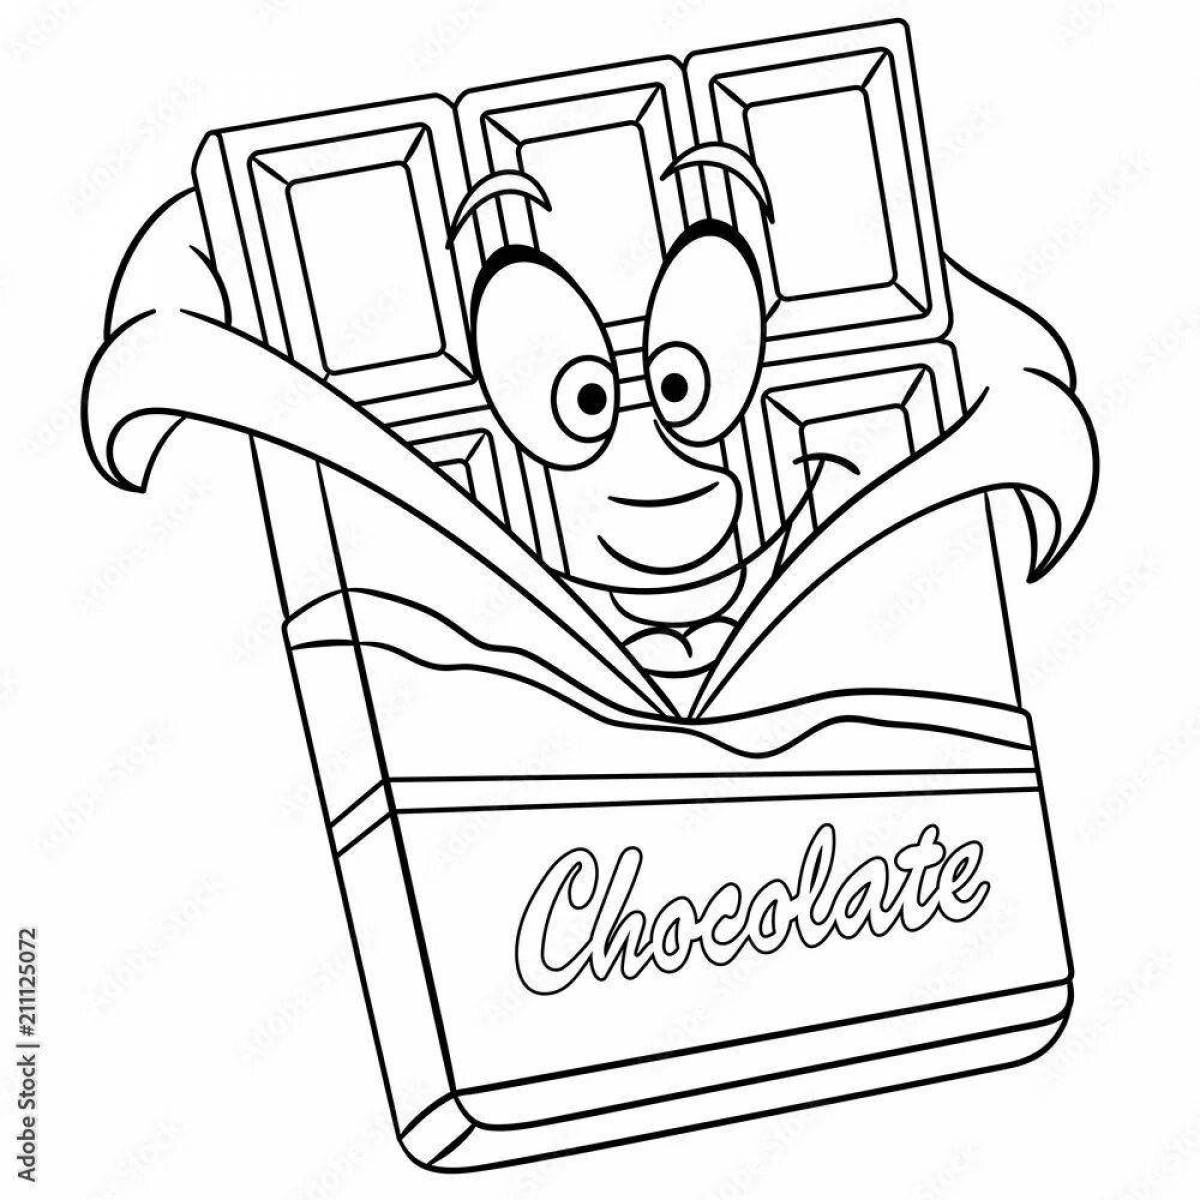 Gooey chocolate coloring pages for kids